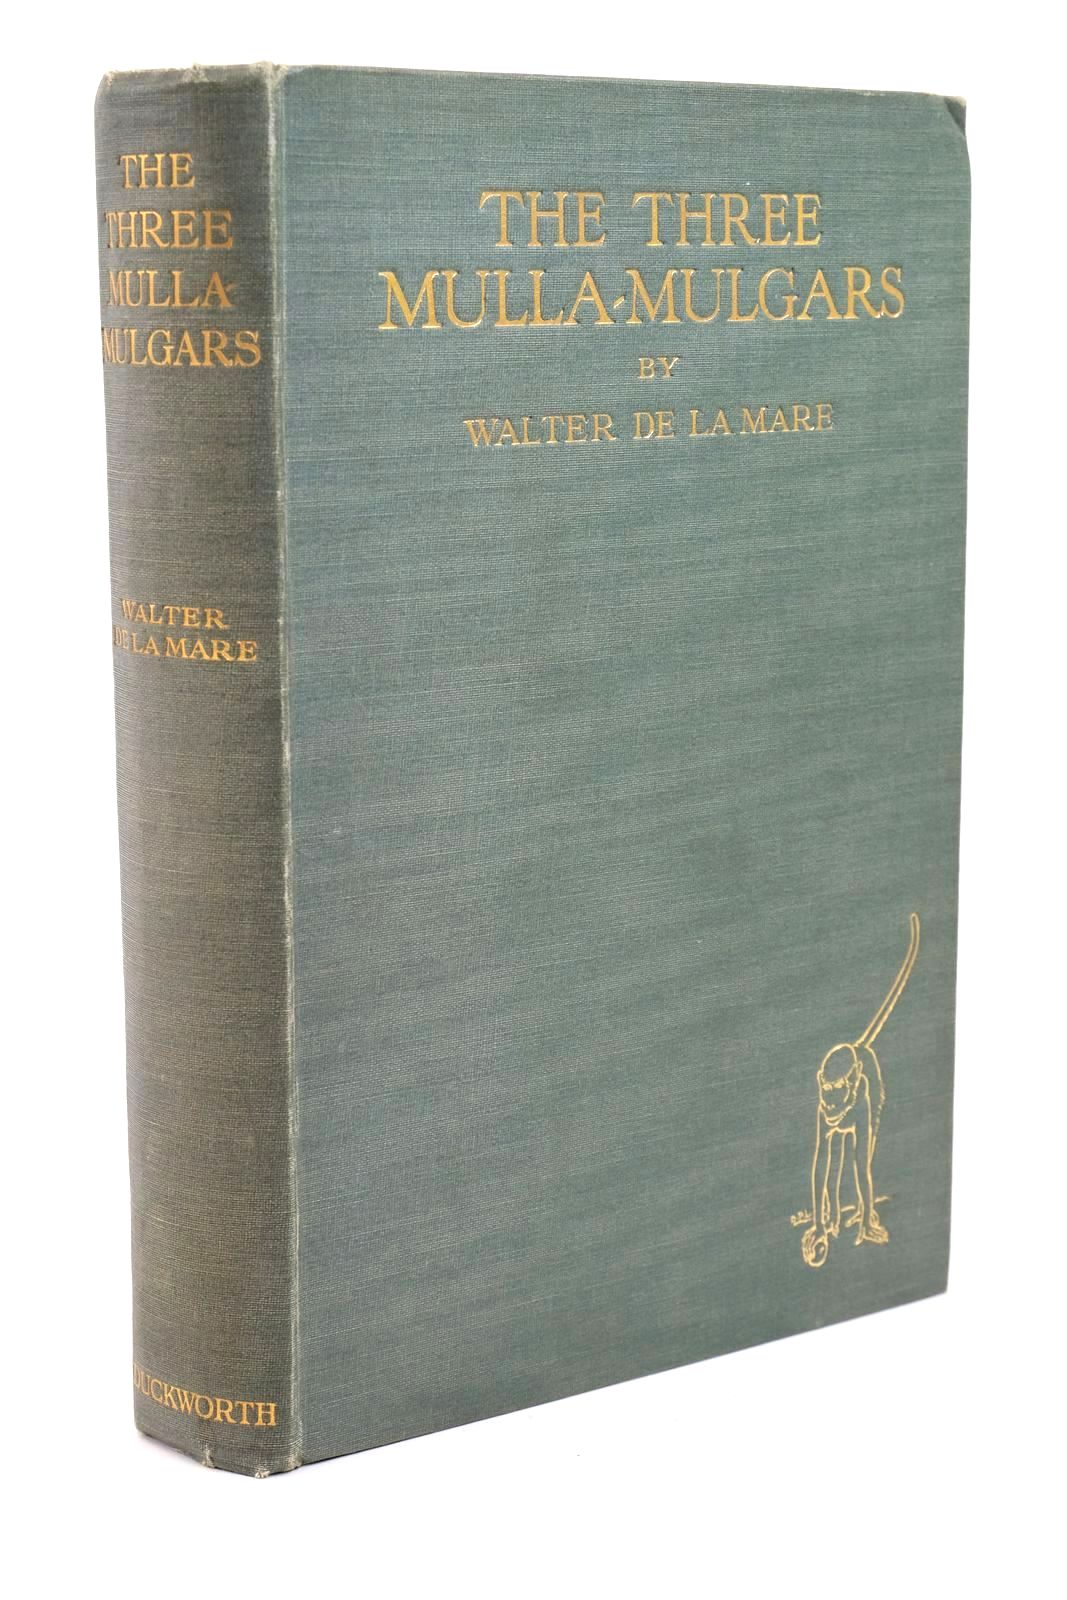 Photo of THE THREE MULLA-MULGARS written by De La Mare, Walter illustrated by Lathrop, Dorothy P. published by Duckworth &amp; Co. (STOCK CODE: 1322978)  for sale by Stella & Rose's Books